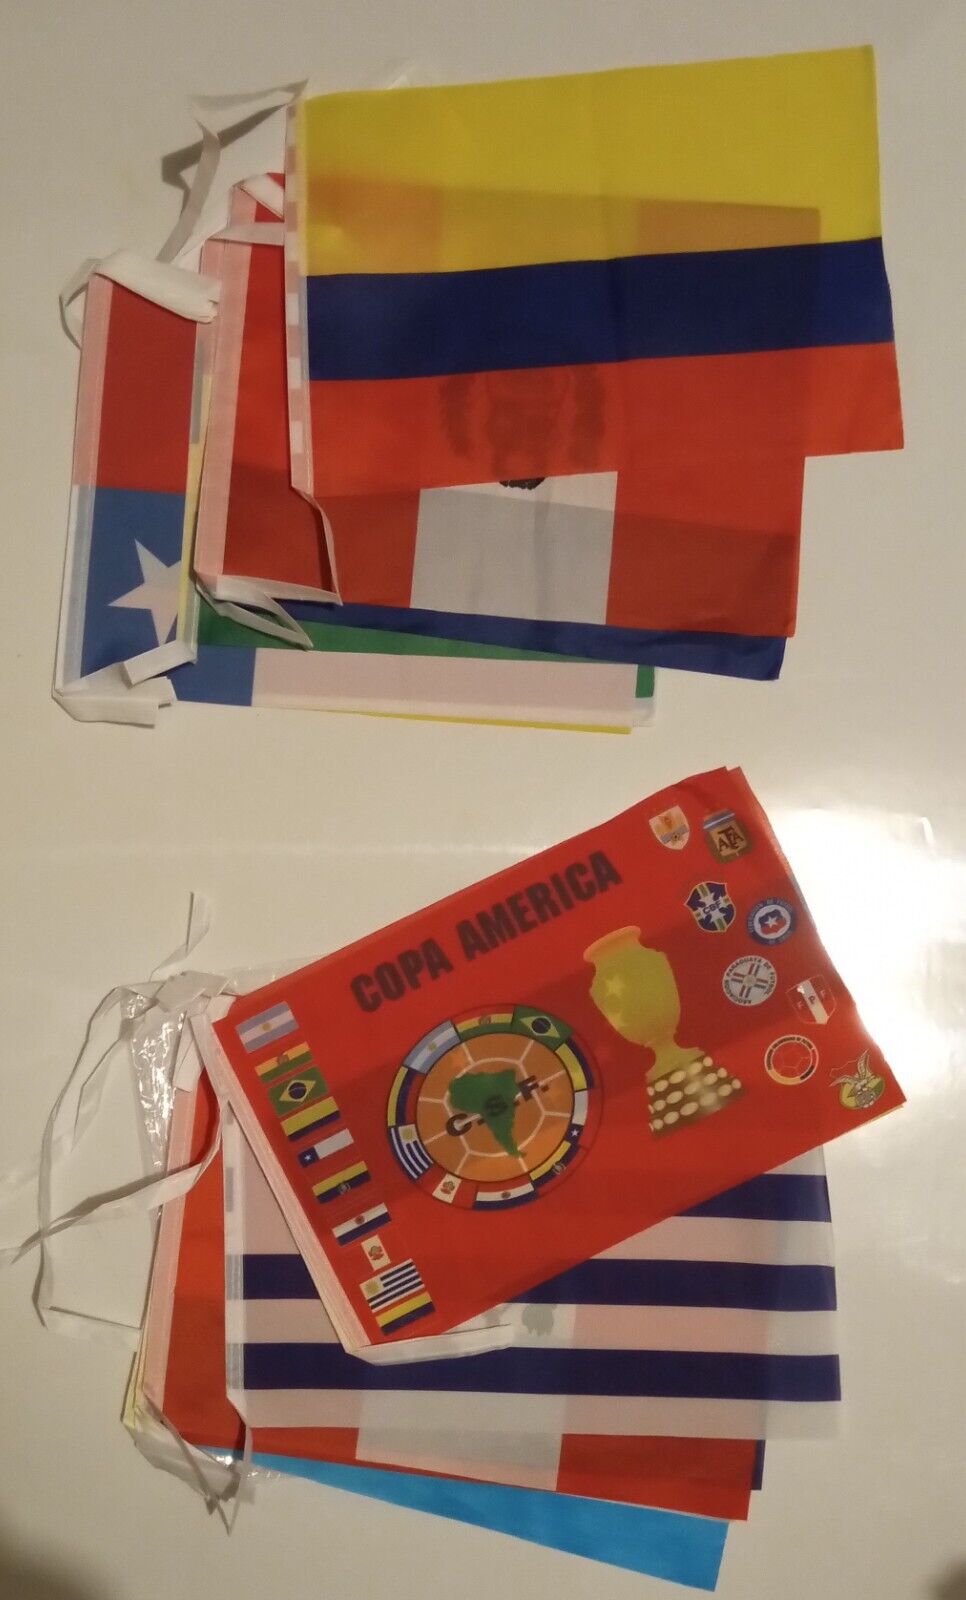 2 COPA AMERICA 2019 + COPA AMERICA GENERIC FLAGS ON A STRING - 2 SETS FOR $25